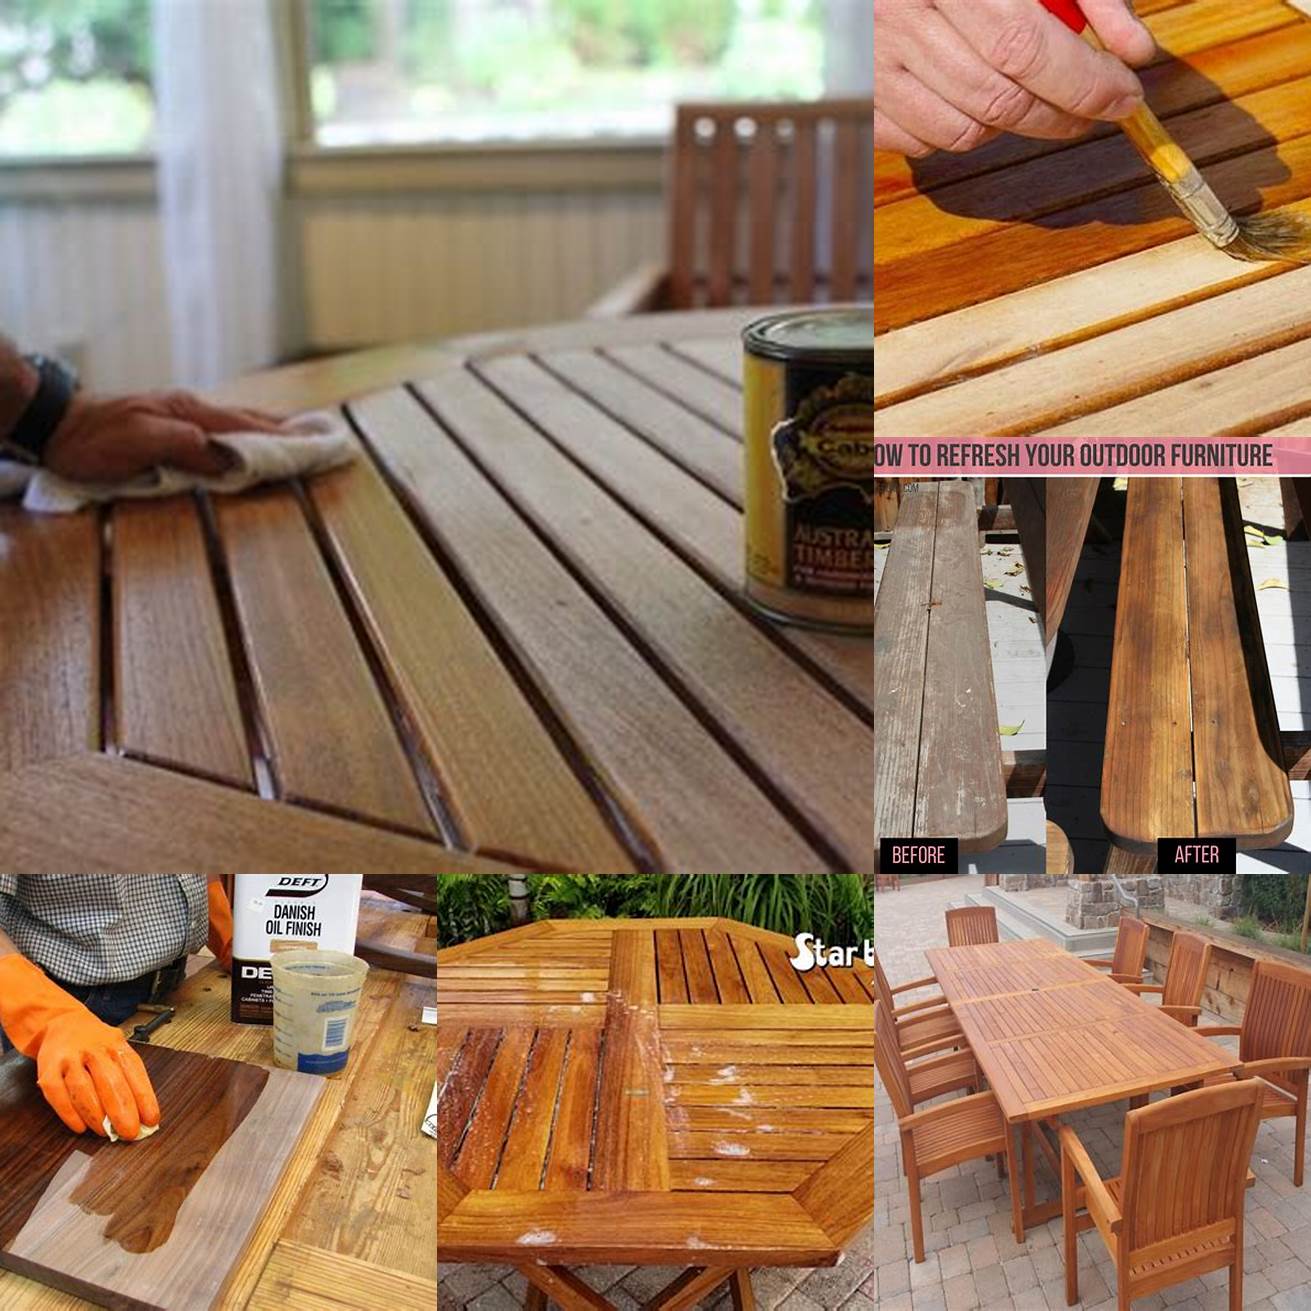 Applying the Solution to the Teak Furniture